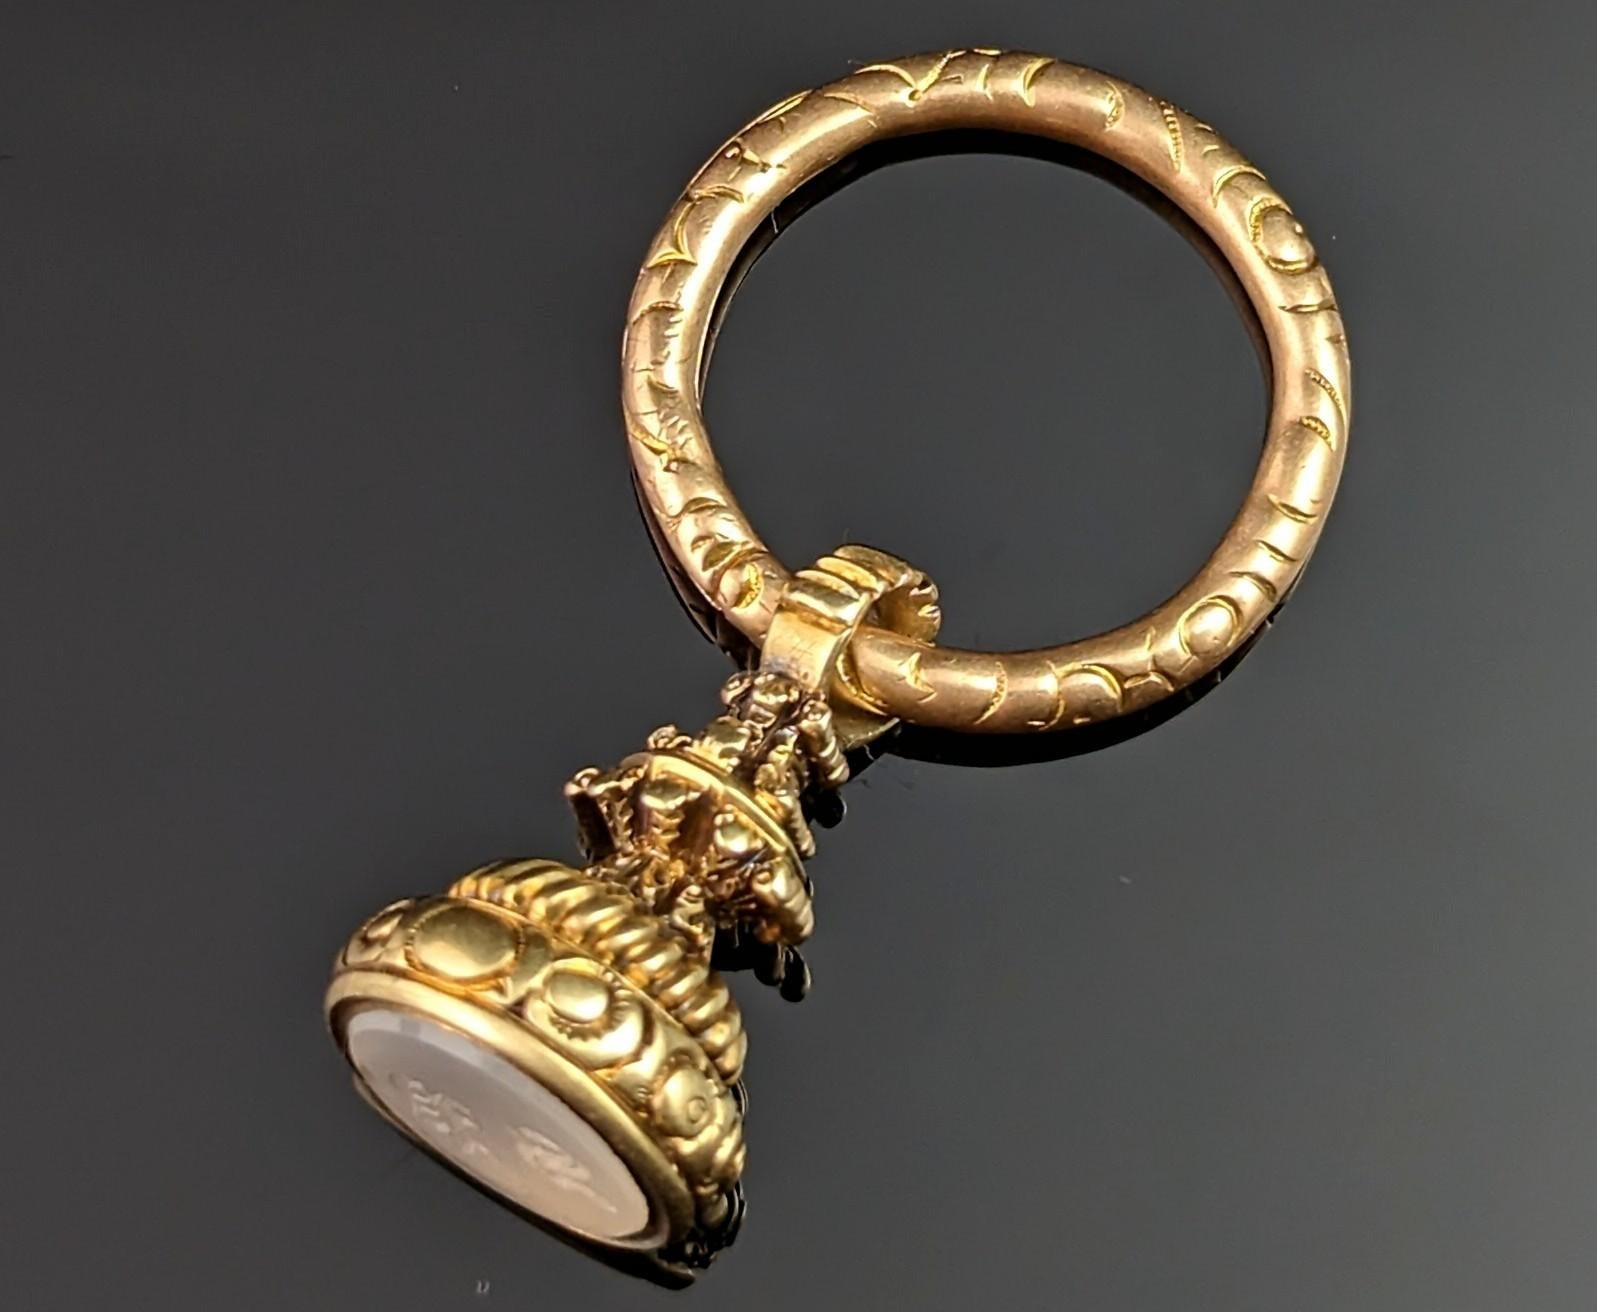 We can't get enough of this charming and alluring Georgian gold seal fob and split ring pendant.

I'm sure you will agree that there is just a certain type of magic that exudes from Georgian pieces, the rich materials, impeccable craftsmanship and